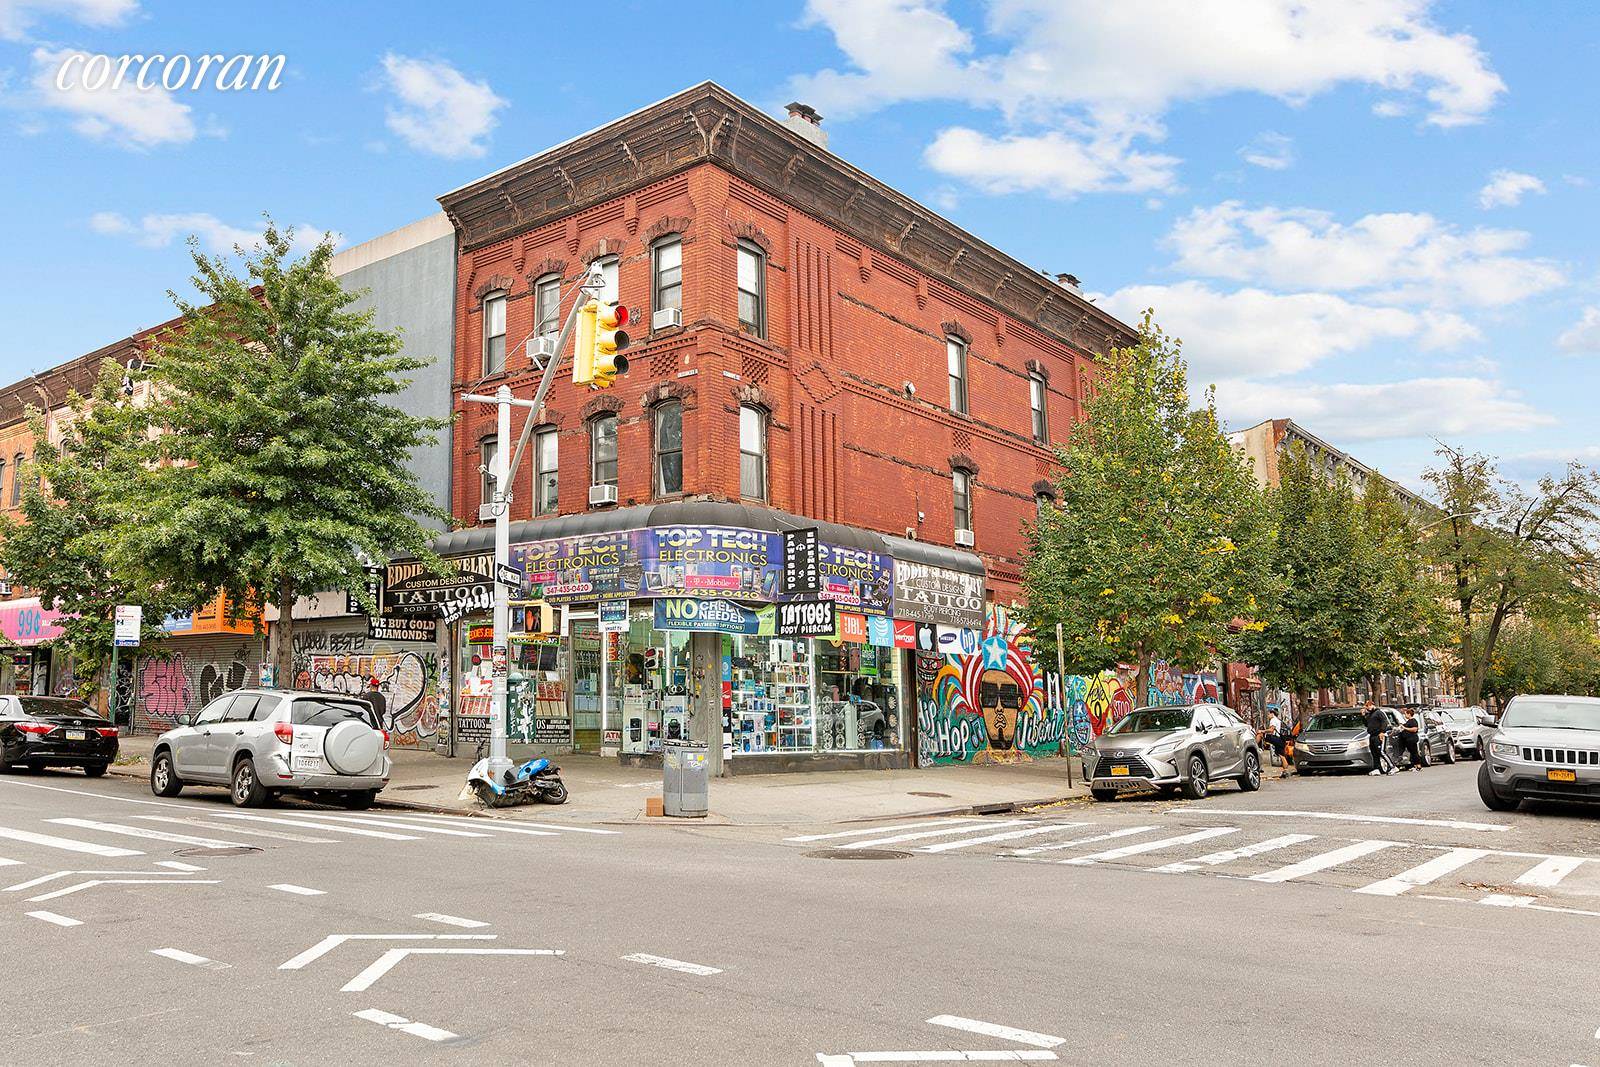 Introducing 383 Knickerbocker Ave, Premium Flagship Corner Mixed Use building in heart of Bushwick in its Busiest Retail amp ; Residential Corridors.